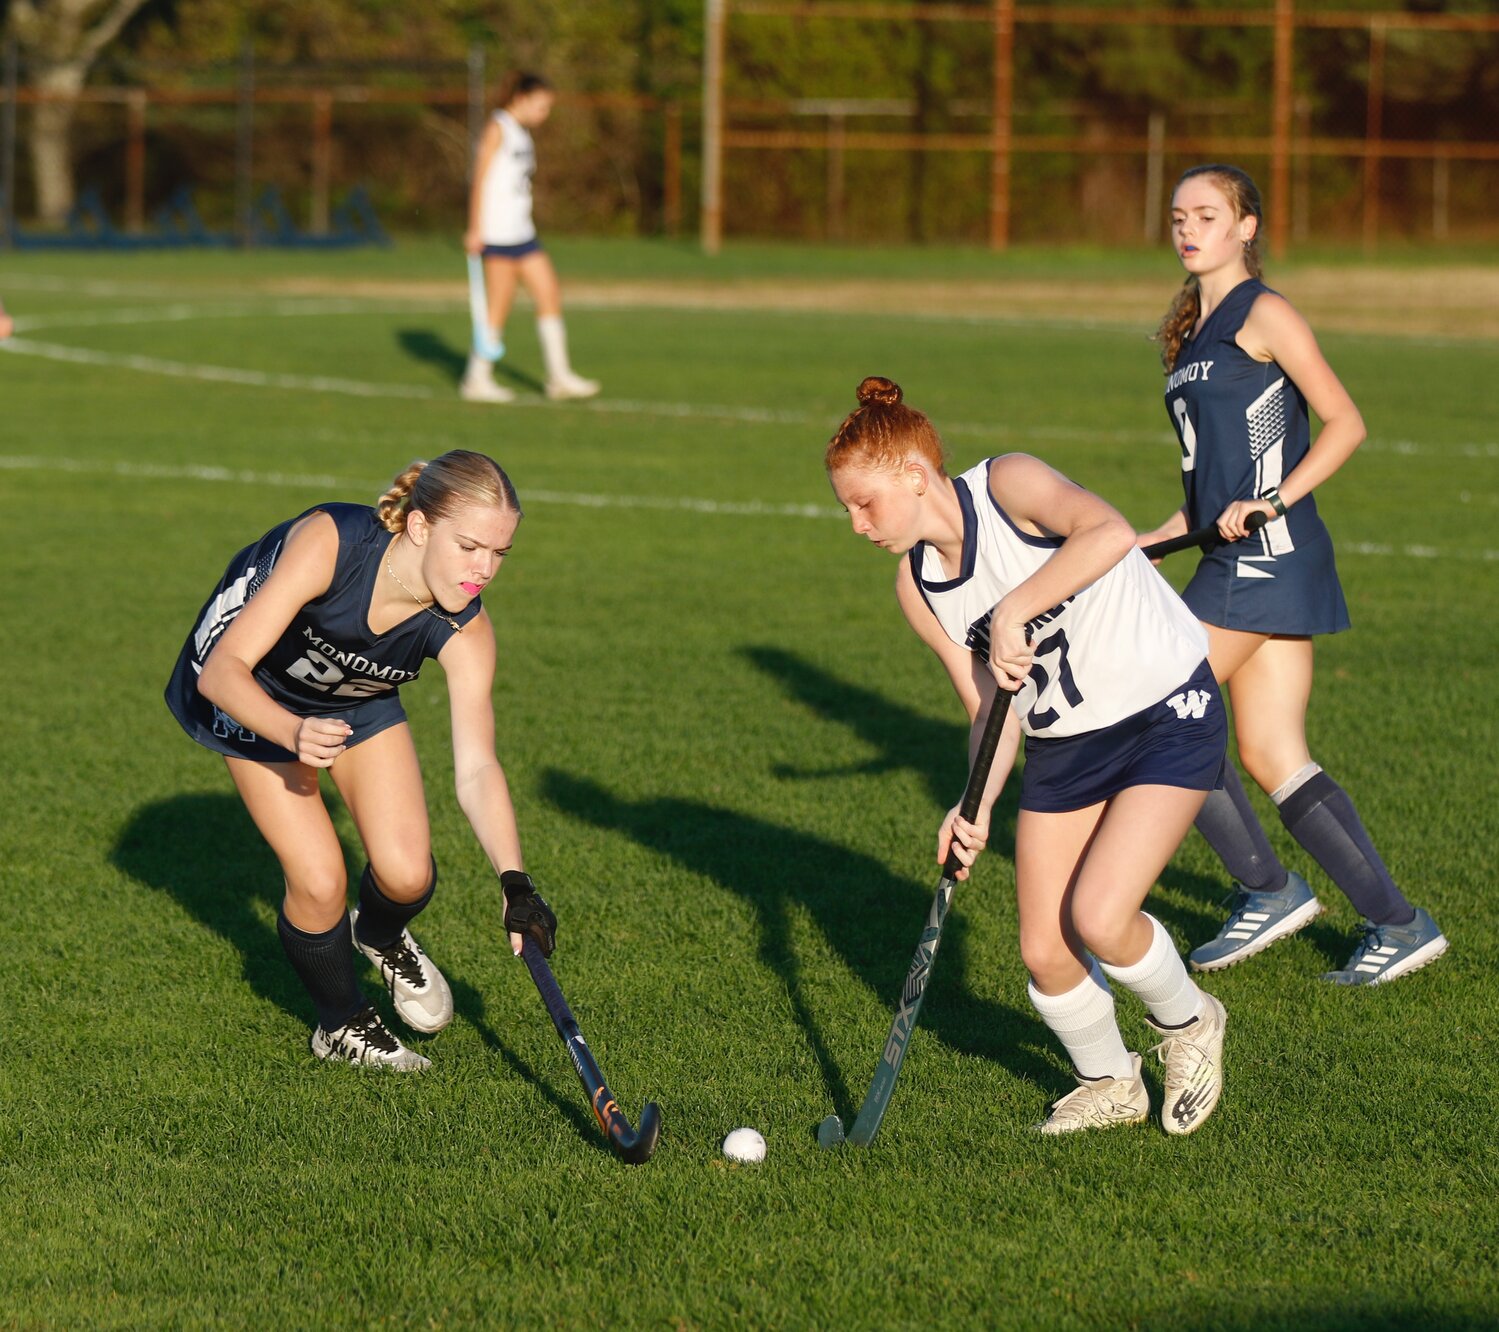 Evie Phelps, right, and a Monomoy player battle for a loose ball during the Whalers’ 6-0 win Oct. 4.